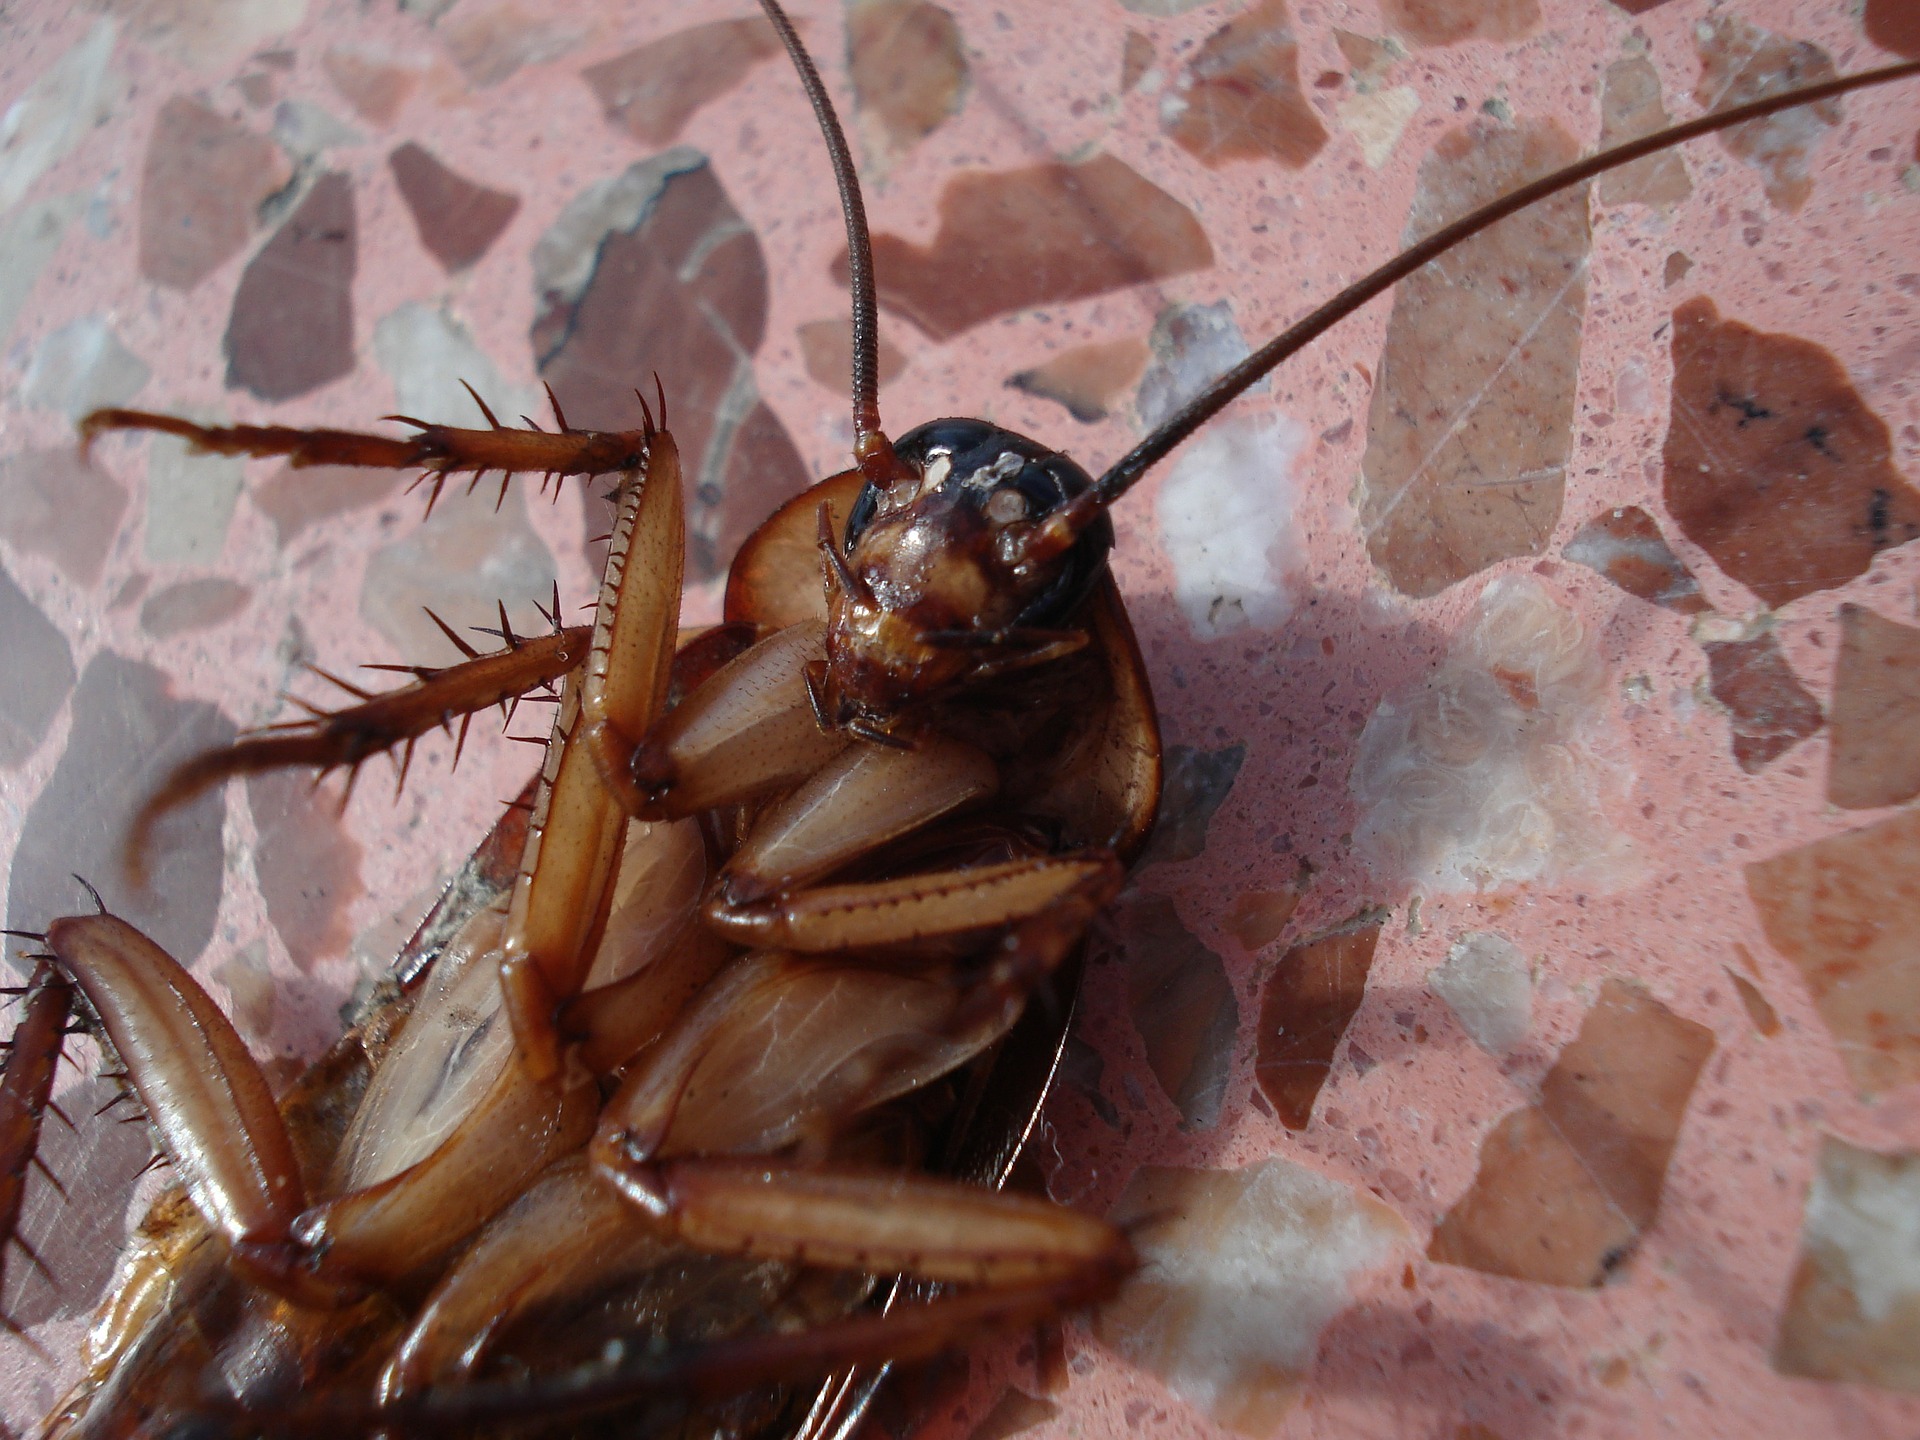 Professional Cockroach Pest Control in Sydney - Eco-Friendly and Reliable